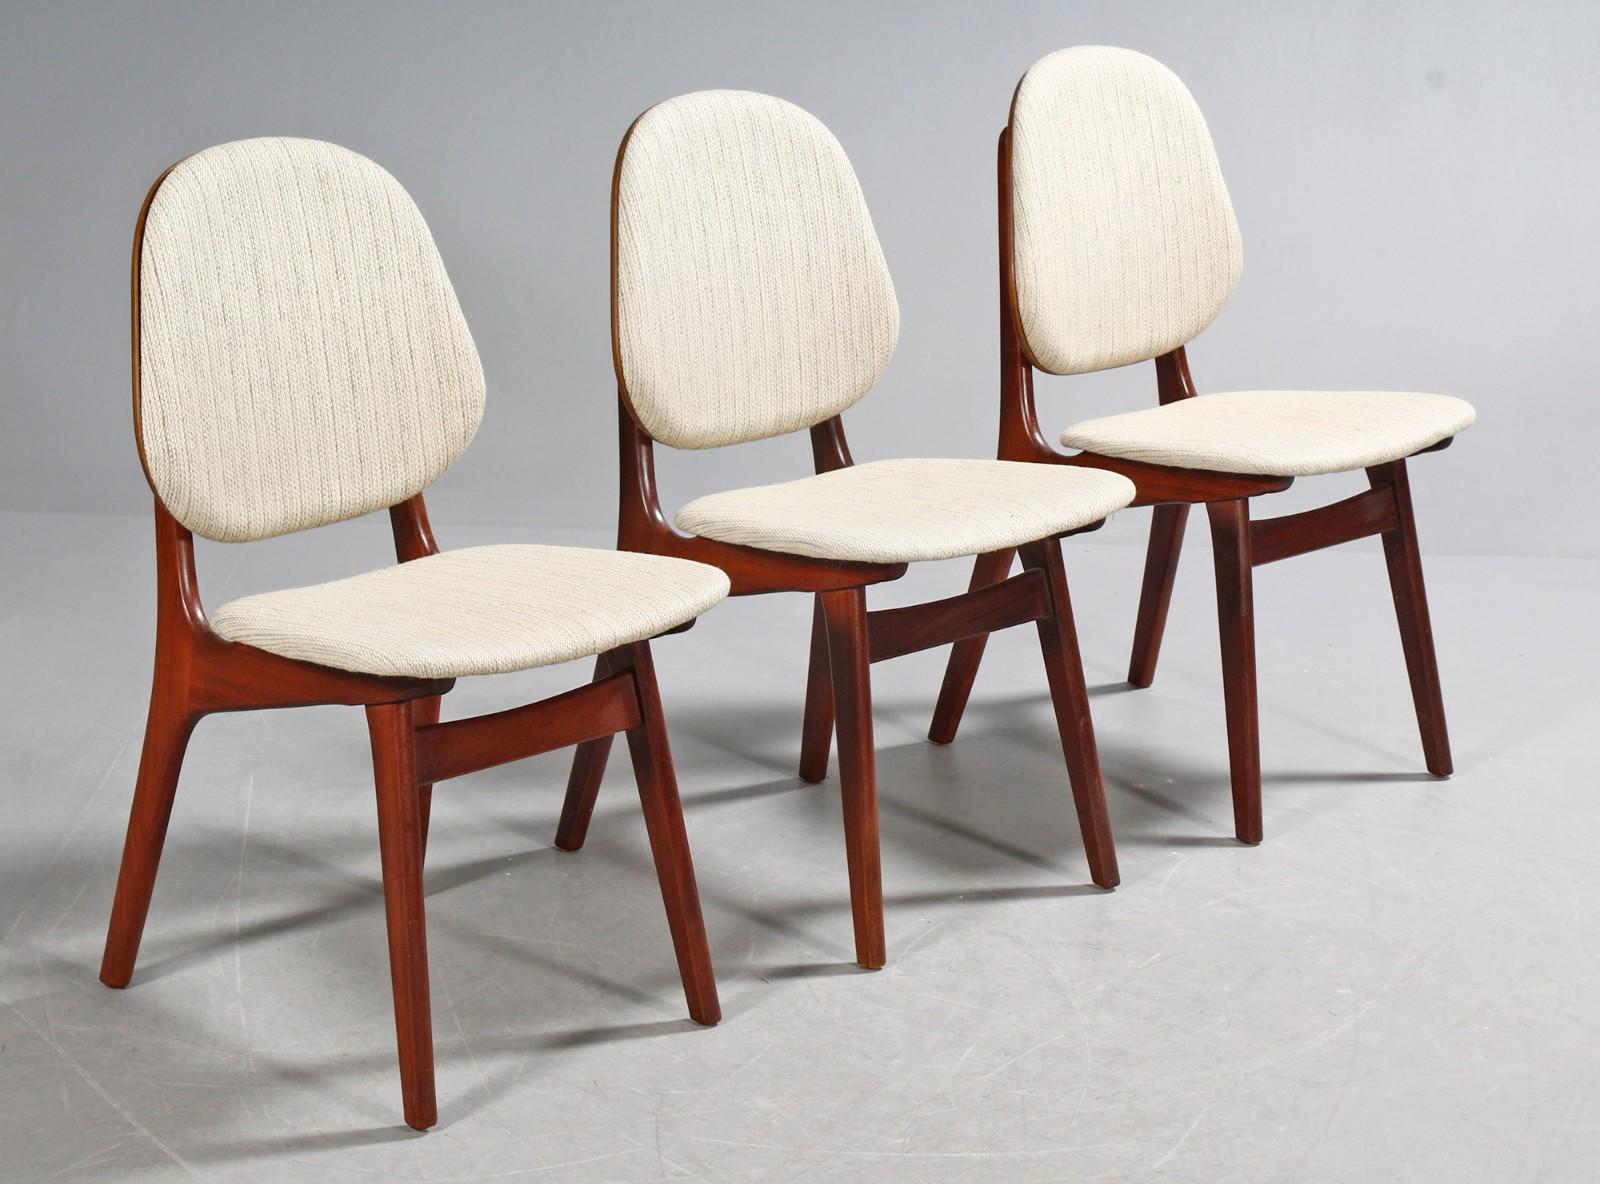 Six danish dining chairs with solid teak frame, shaped and veneered teak cup piece, removable front post with light upholstery fabric, brass spacer. The 1960s. SH. 45 cm
Manufactured in early 60´s at Mogens Kold.

The designer:
Arne